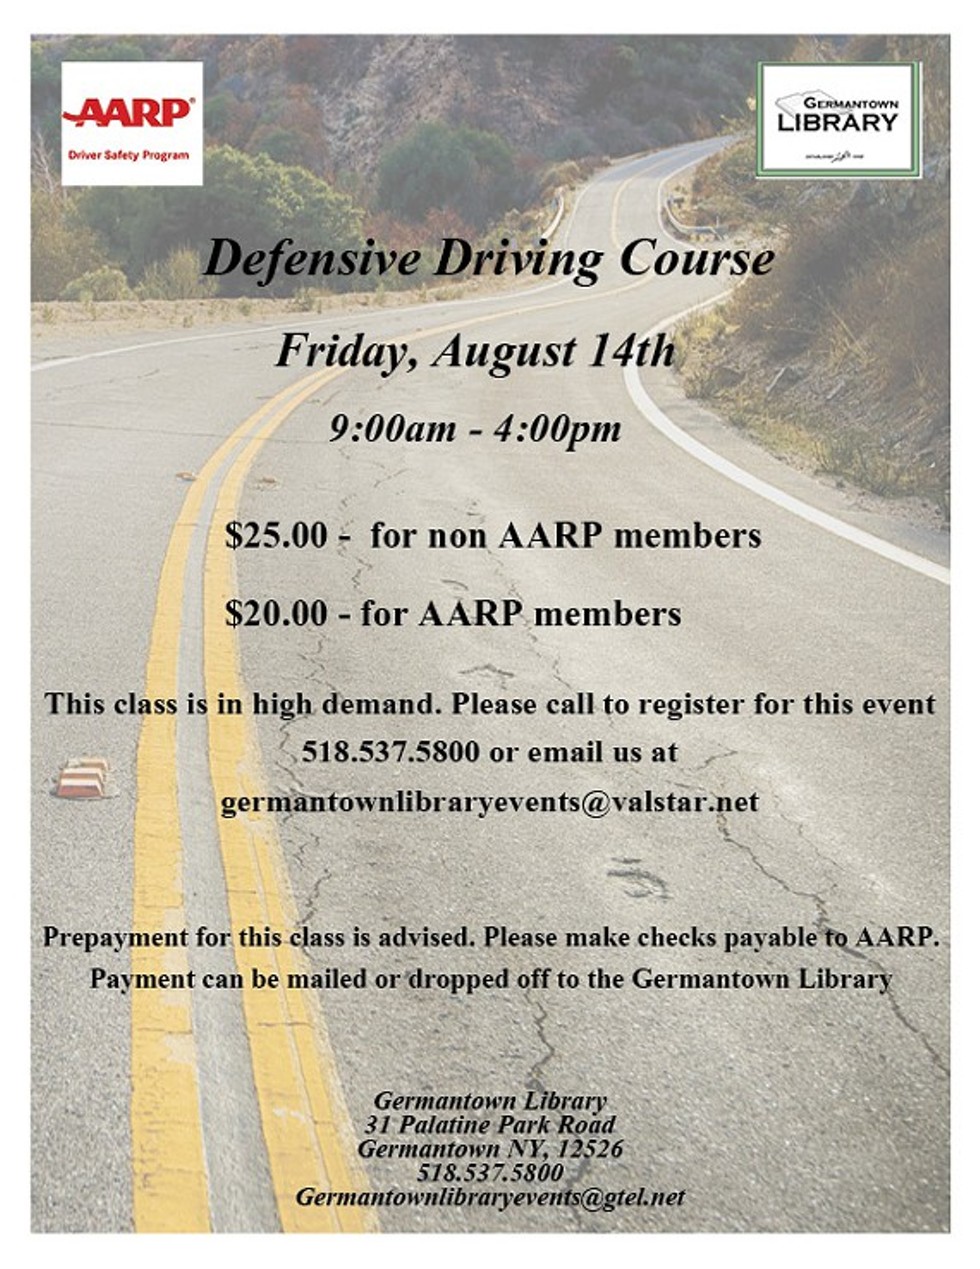 c86850f0_defensive_driving_course.jpg